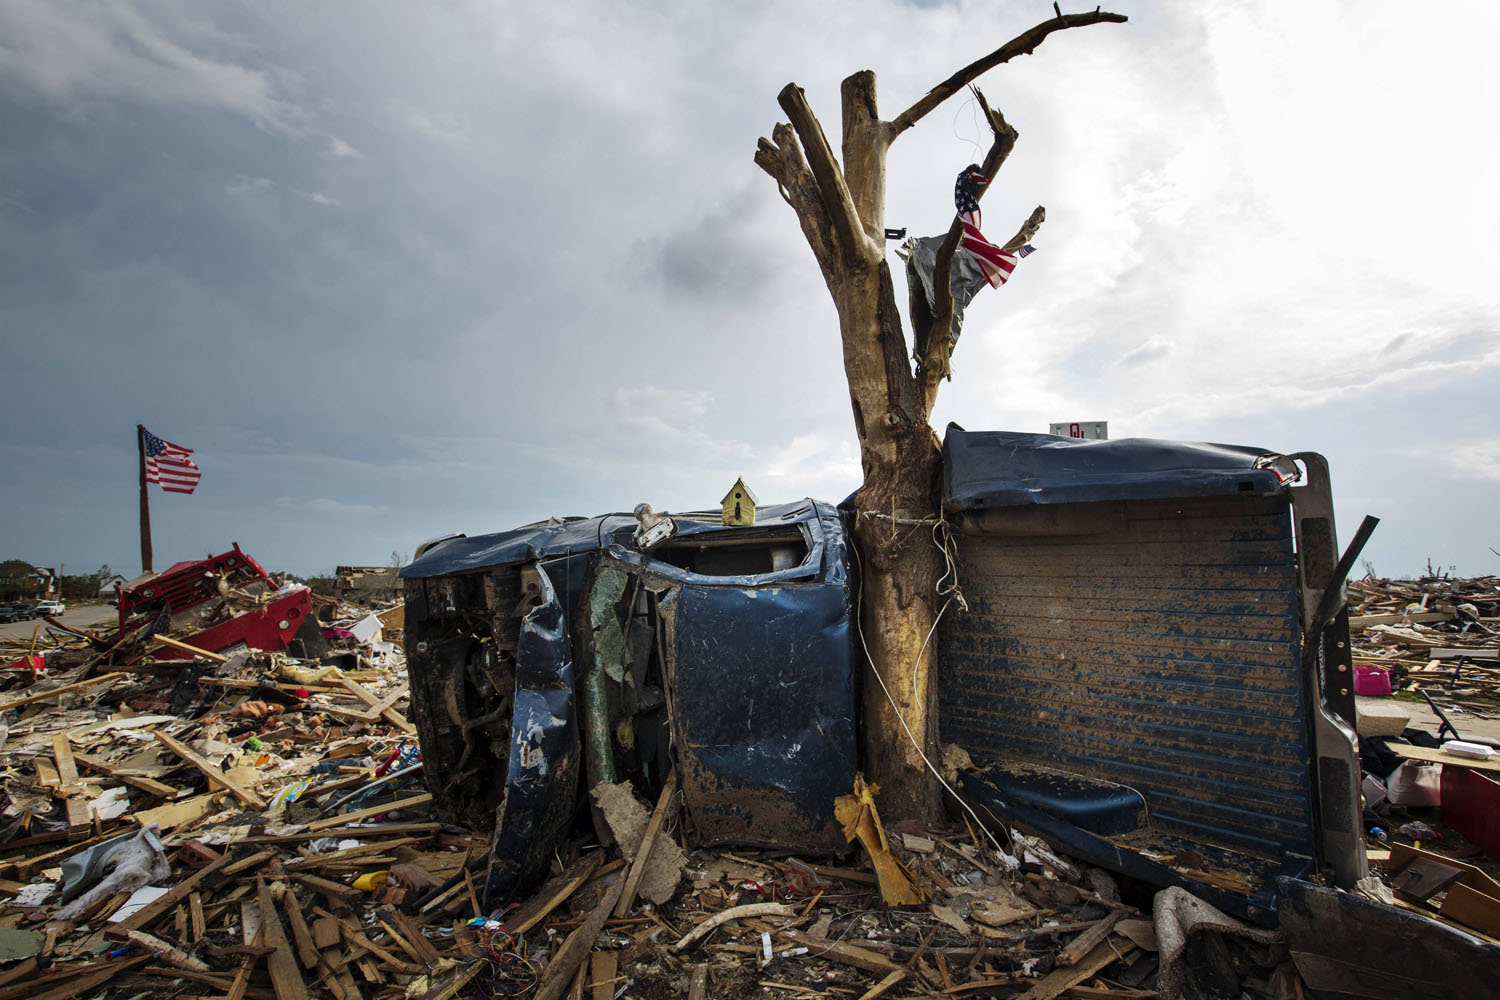 The body of a pickup truck is wrapped around a tree trunk after being thrown there by by a tornado in Moore, Oklahoma